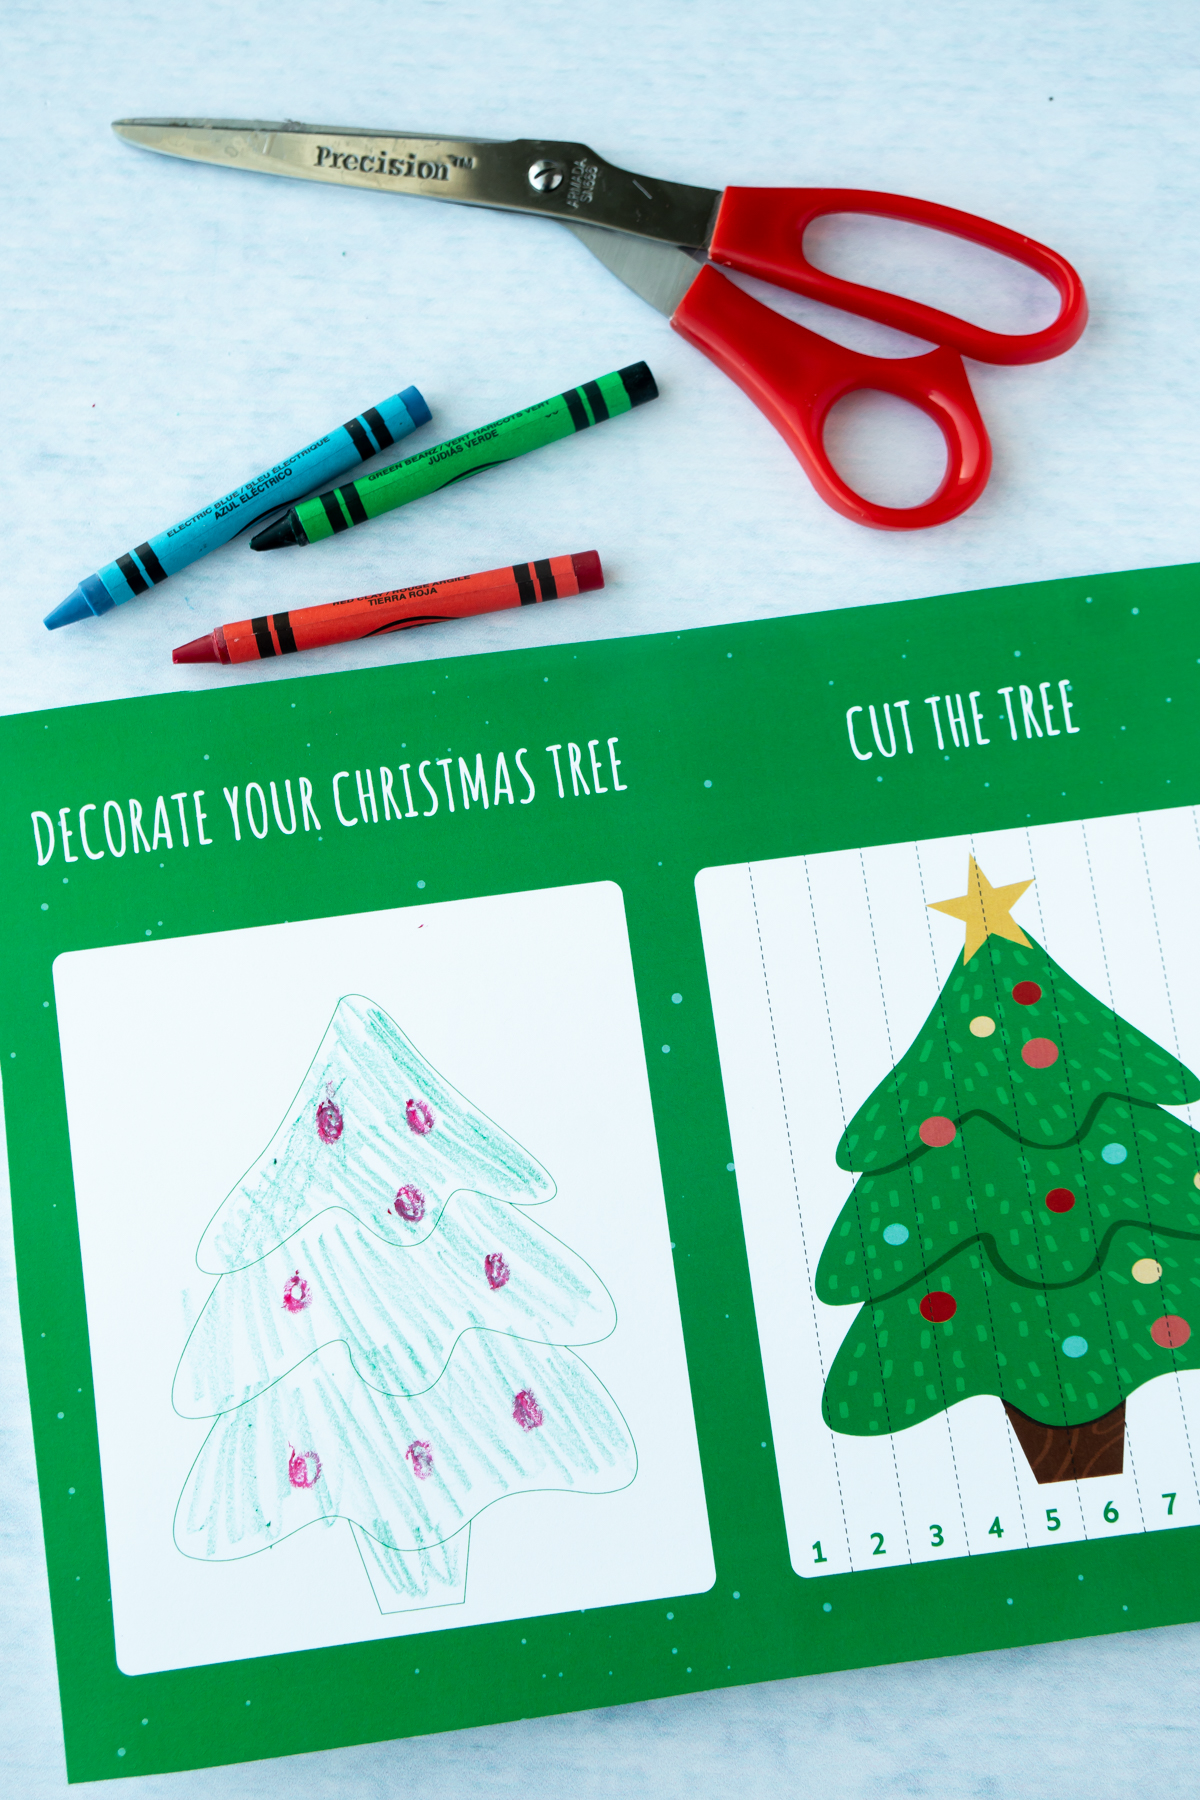 Christmas activity sheets with a tree decorated